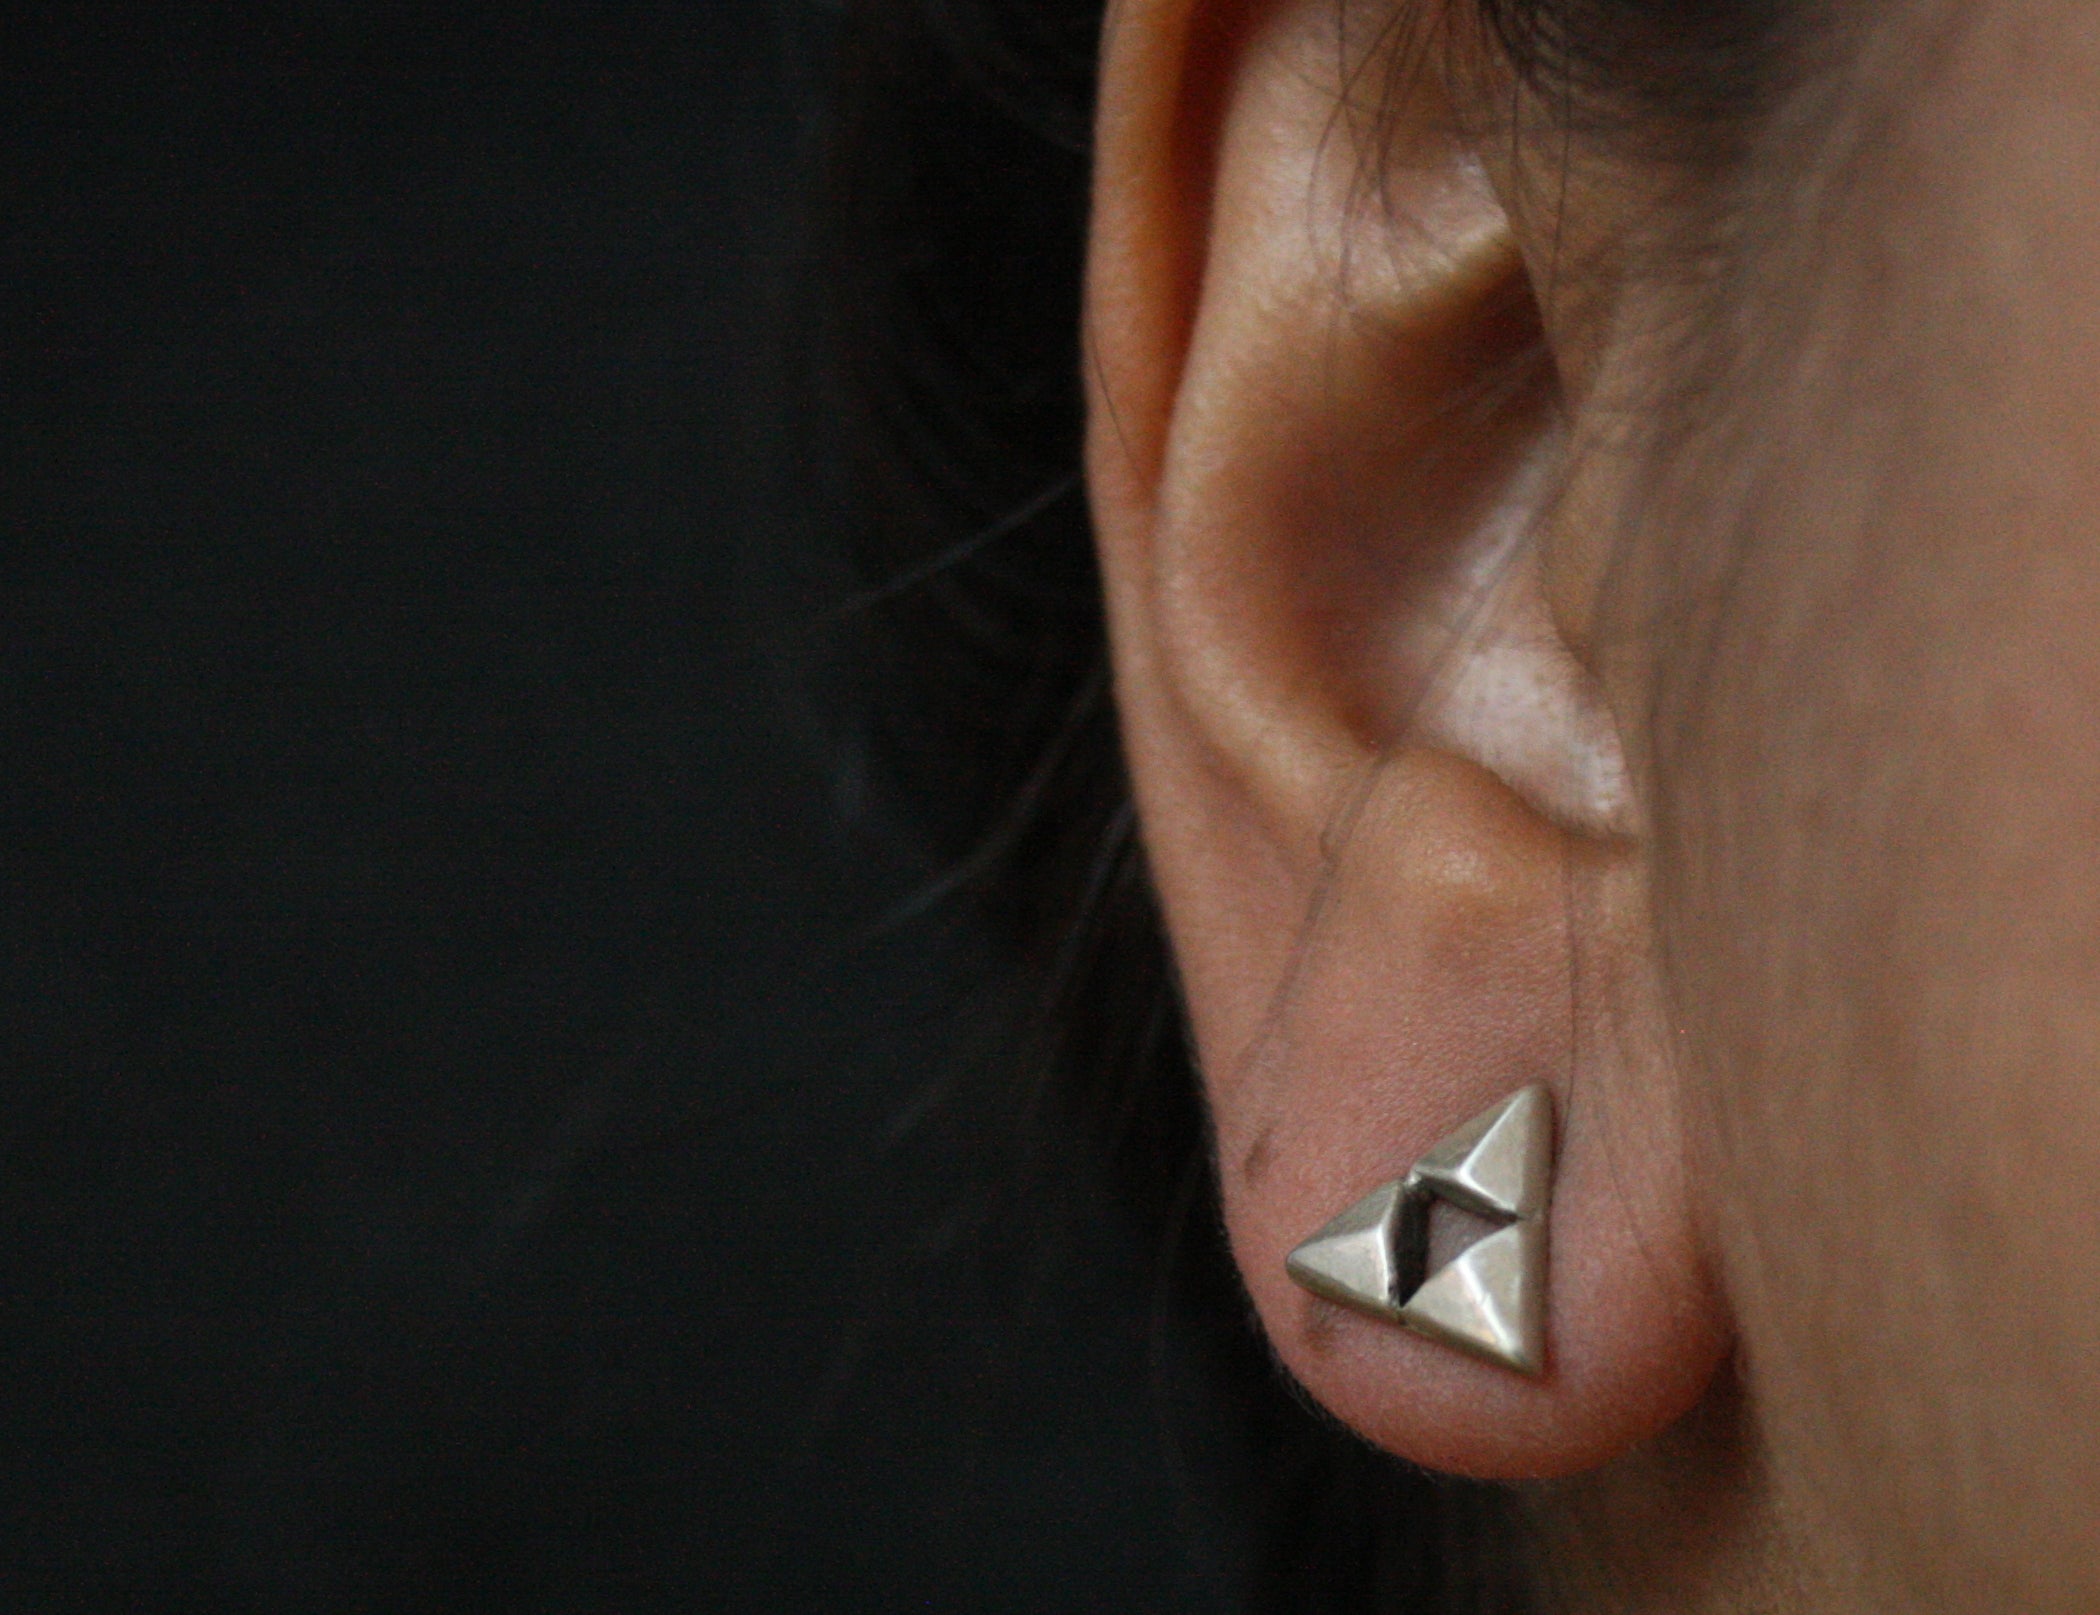 Buy Handcrafted Silver Studs Online - Pyramid Studs by Quirksmith